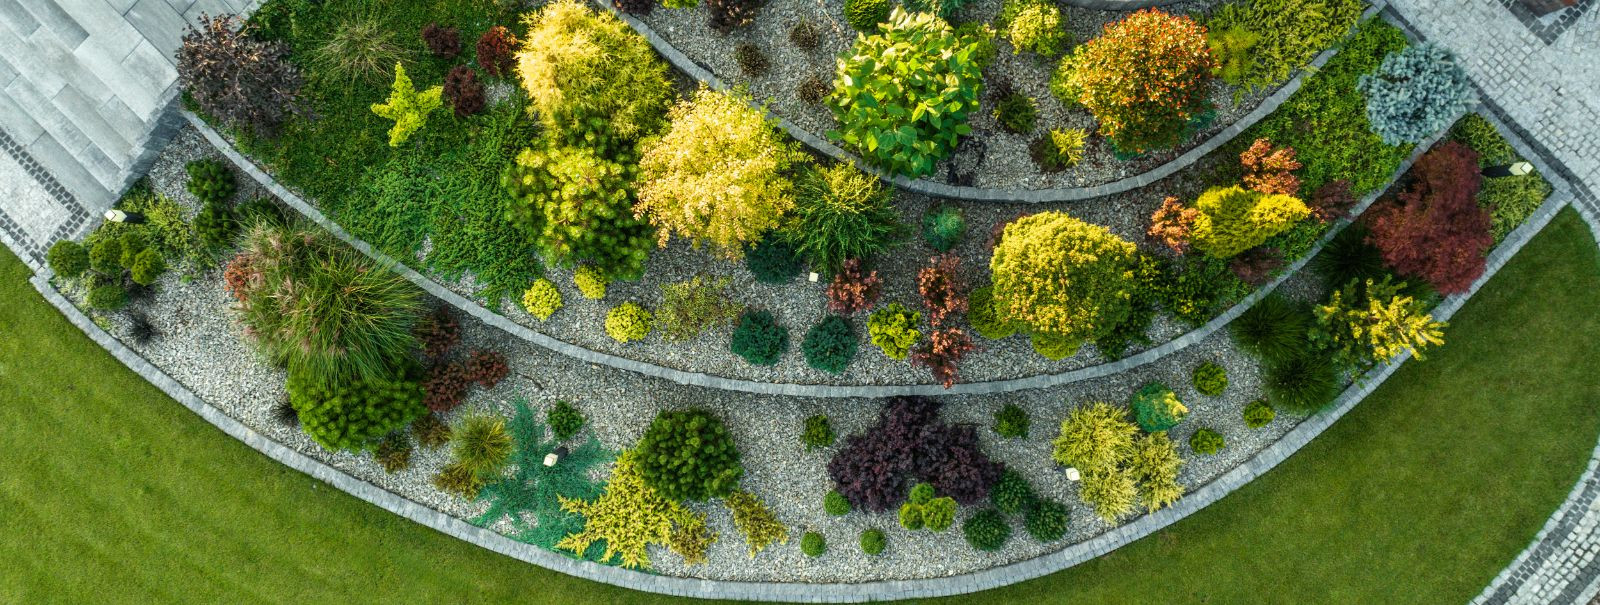 Landscaping is an art form that combines nature with human creativity to transform any space into a harmonious sanctuary. It's about crafting an environment tha